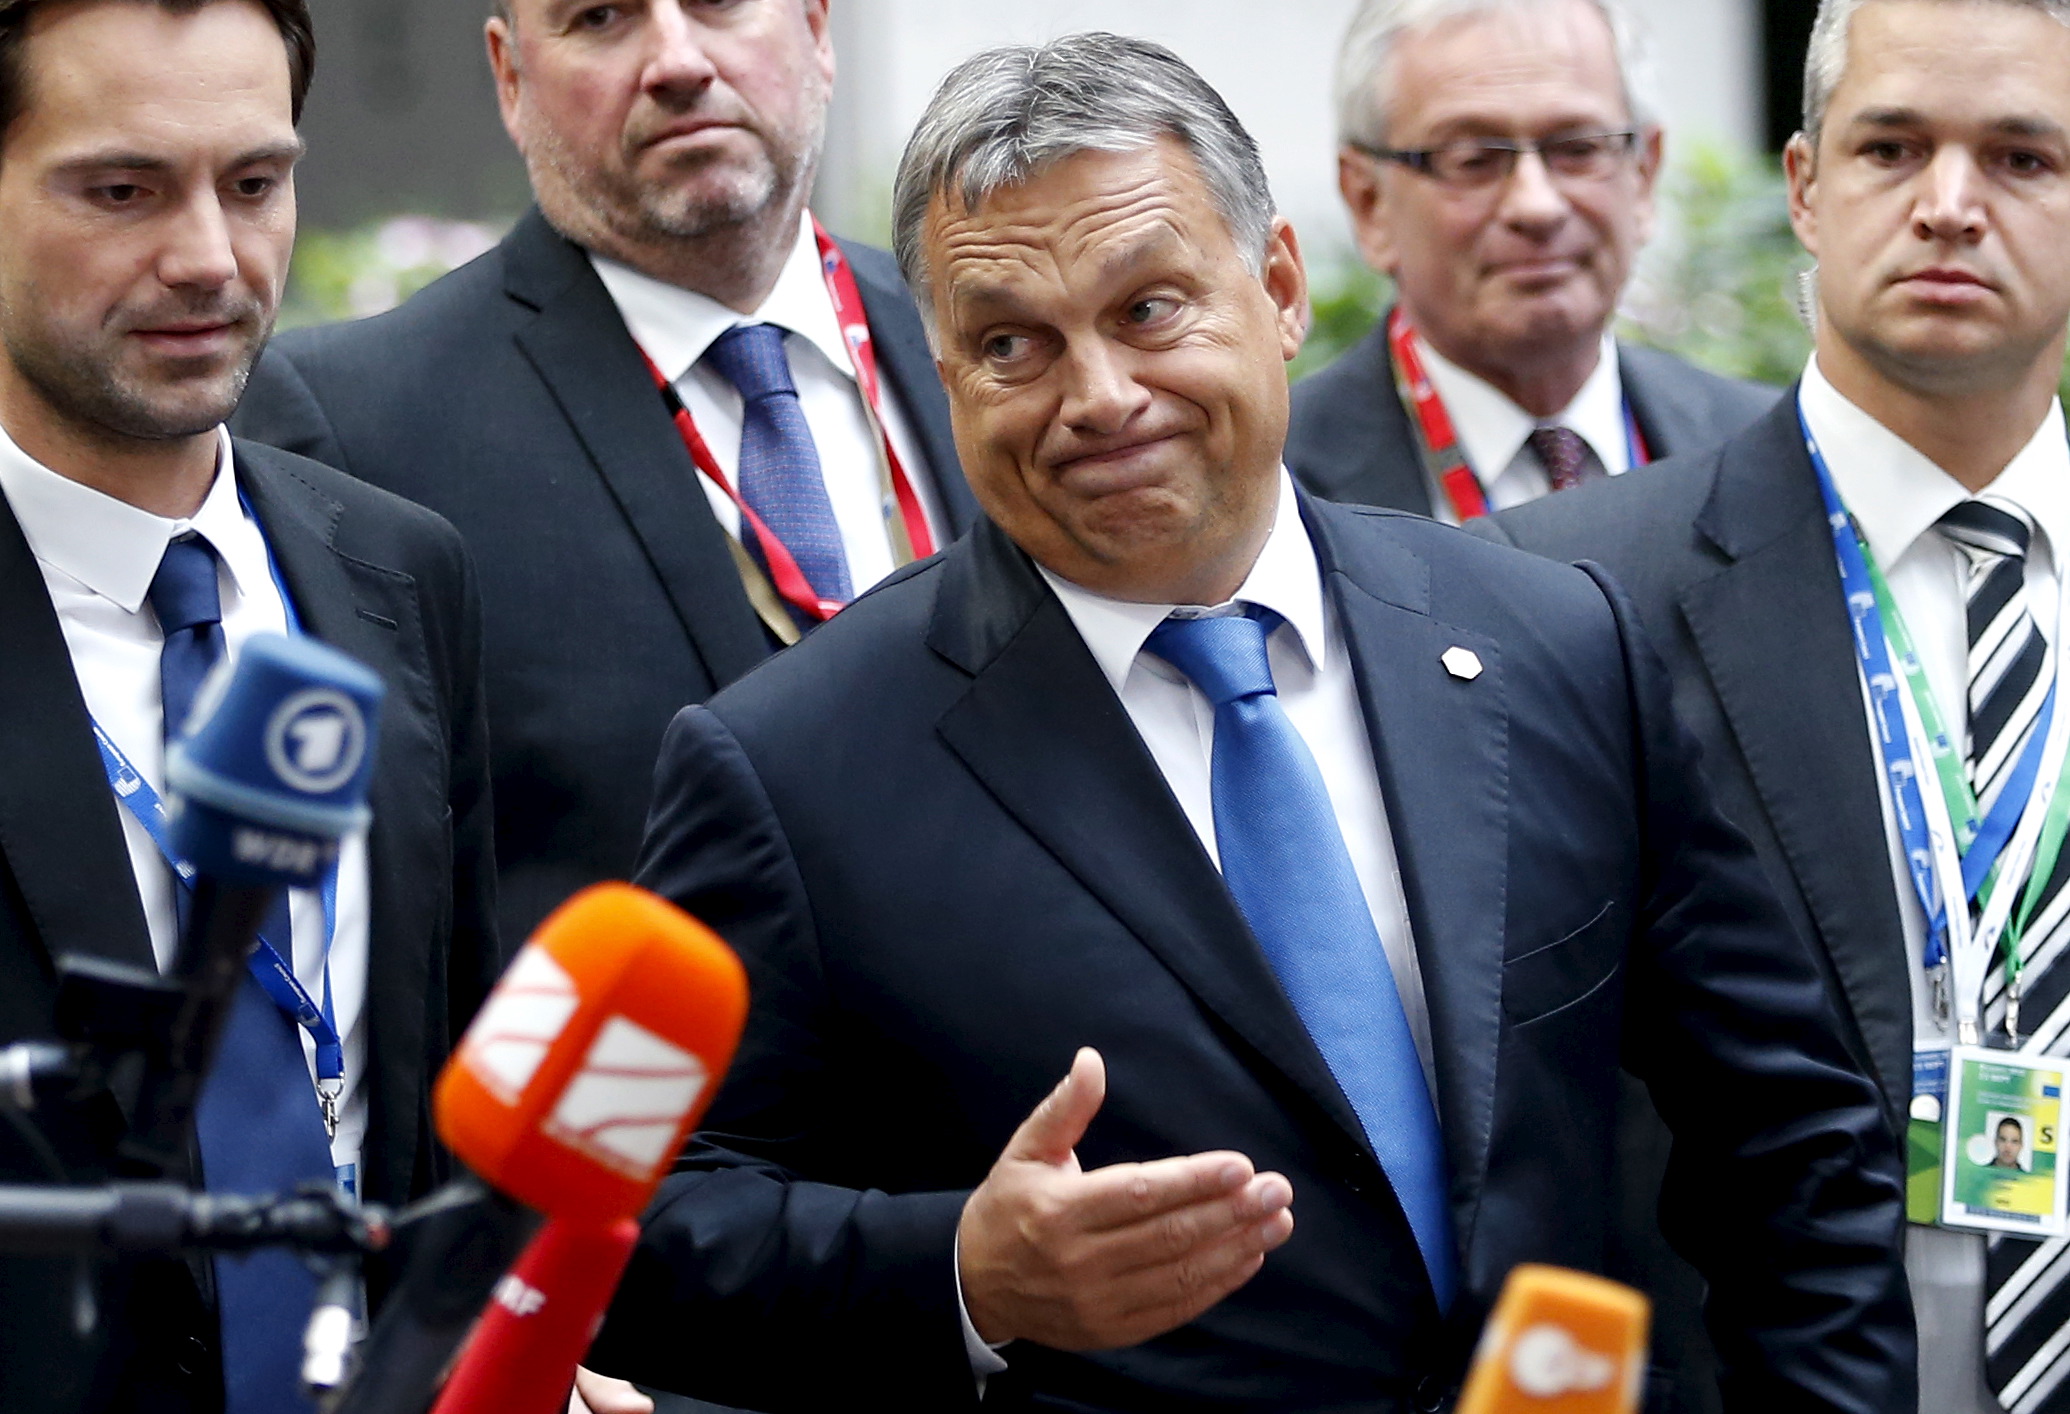 Hungary's Prime Minister Viktor Orban reacts as he arrives at a European Union leaders extraordinary summit on the migrant crisis, in Brussels, 23 September 2015